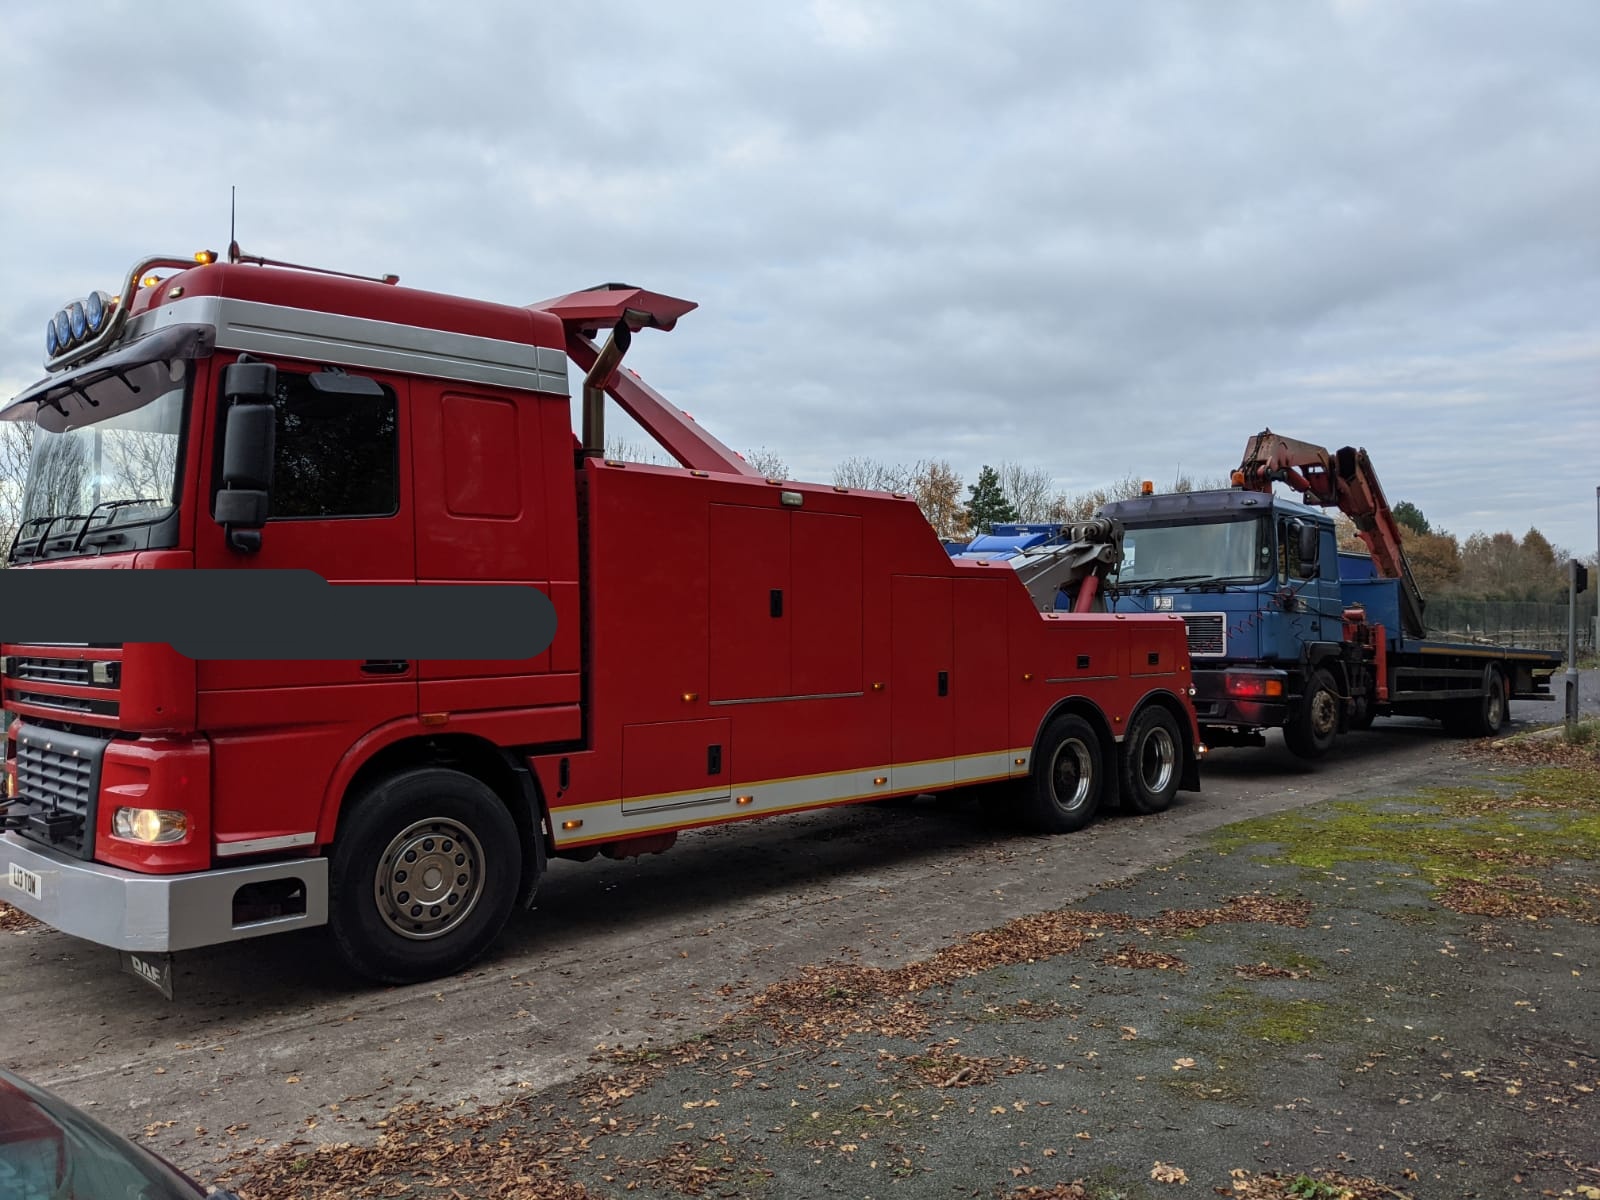 NEWS | HGV seized due to driver having no licence and one motorist arrested on suspicion of drug driving